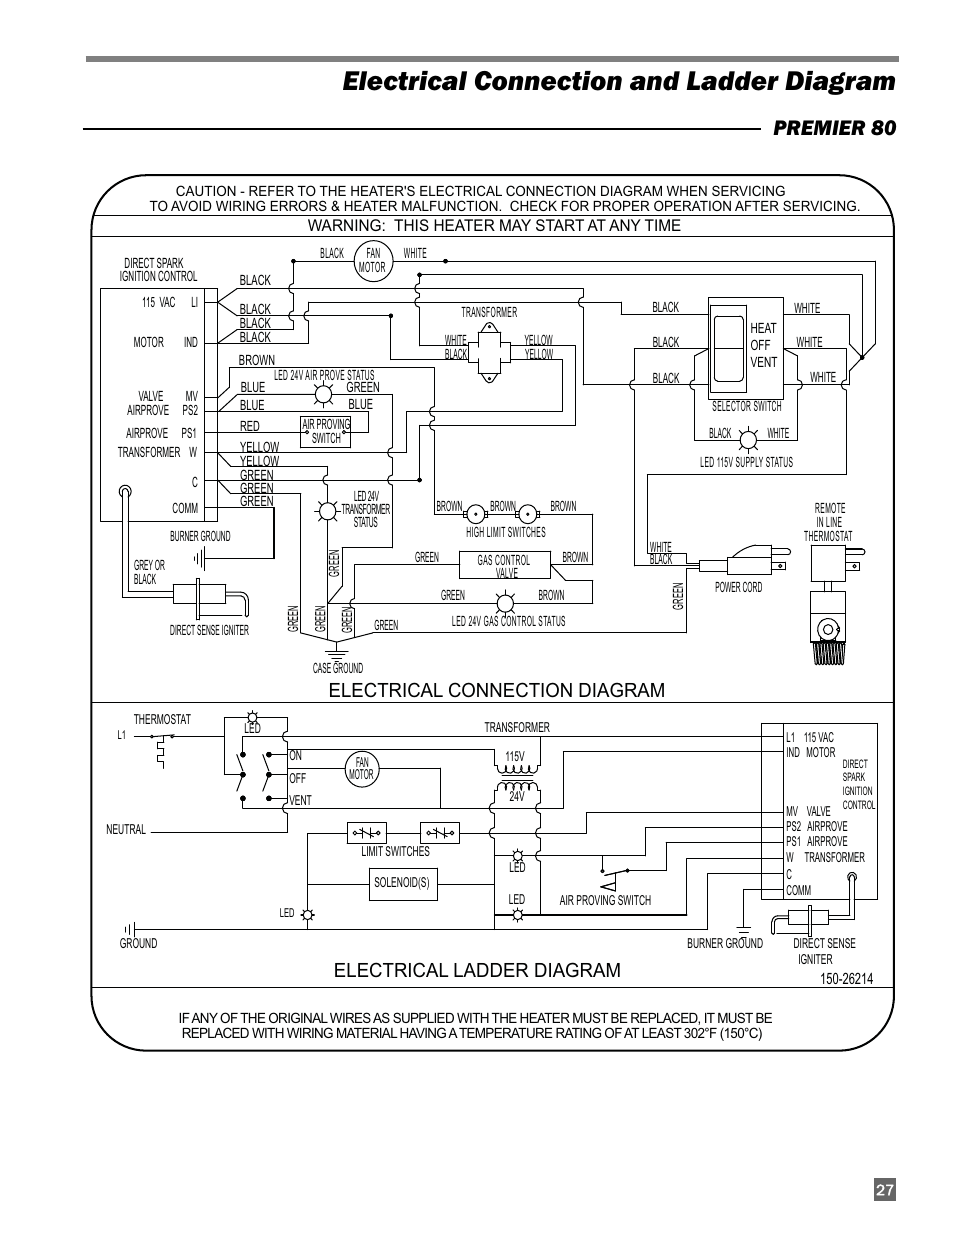 Electrical connection and ladder diagram, Premier 80, Electrical connection  diagram | L.B. White 170 Premier User Manual | Page 27 / 34  Lb White Heater Thermostat Wiring Diagram    Manuals Directory